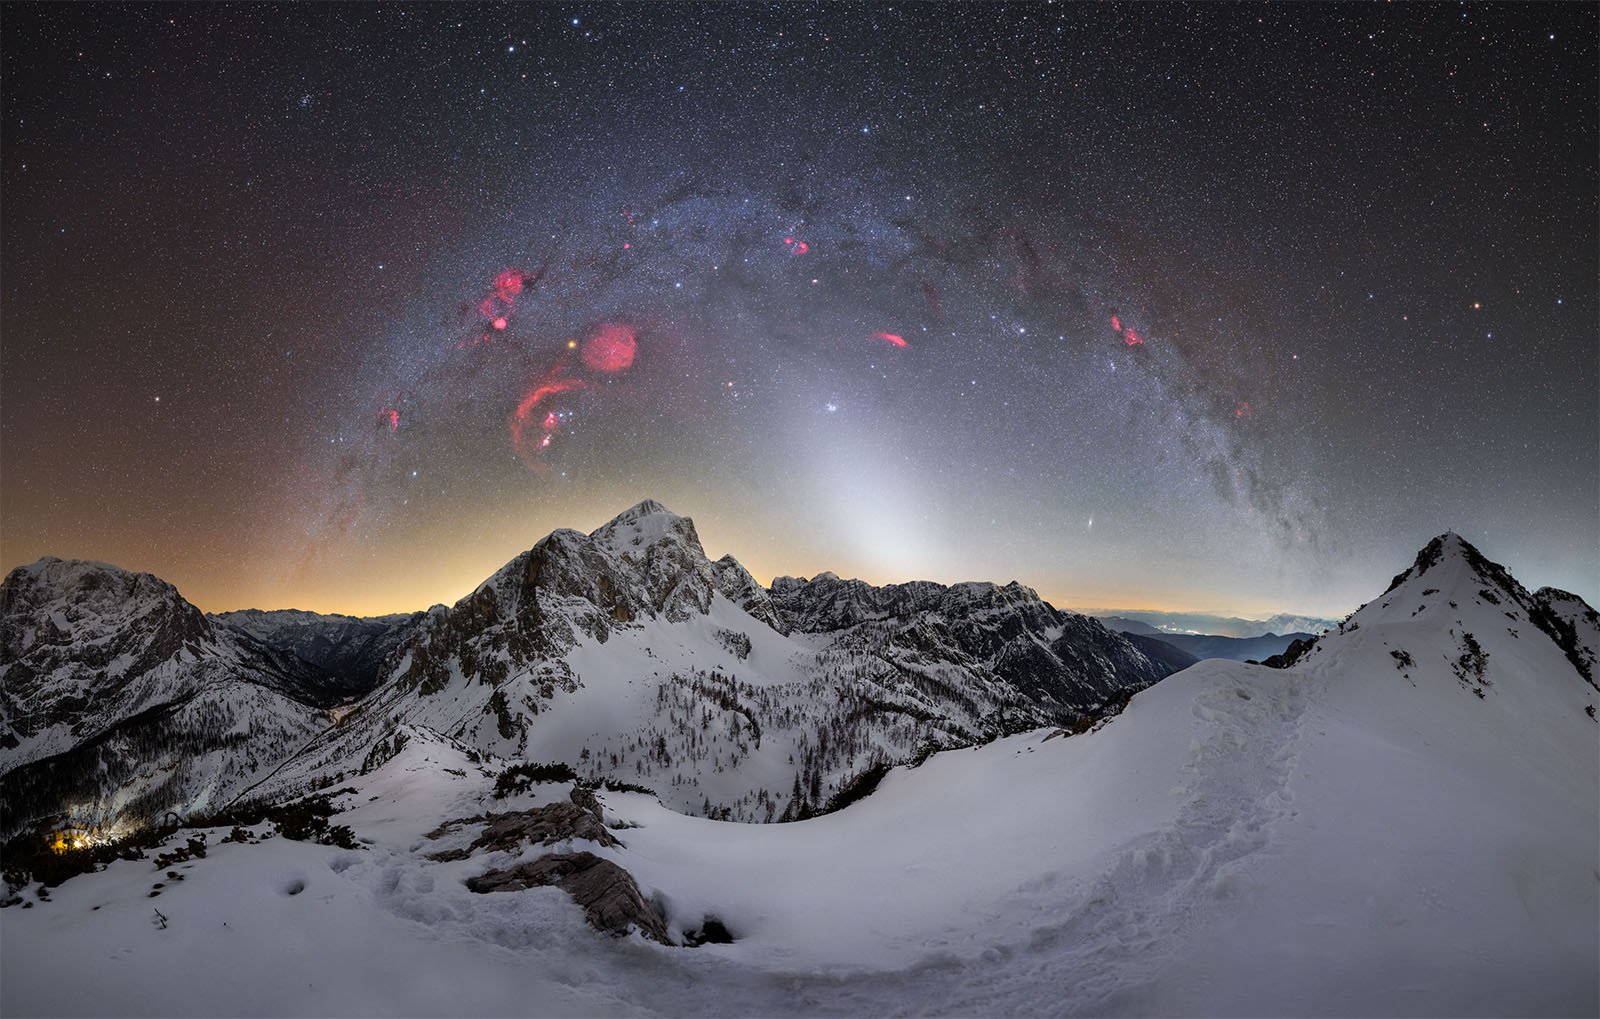 A breathtaking night sky above snow-covered mountains. The Milky Way arcs overhead, with clusters of red nebulae visible. Distant mountain peaks are illuminated by the soft glow of city lights on the horizon, creating a serene and otherworldly landscape.